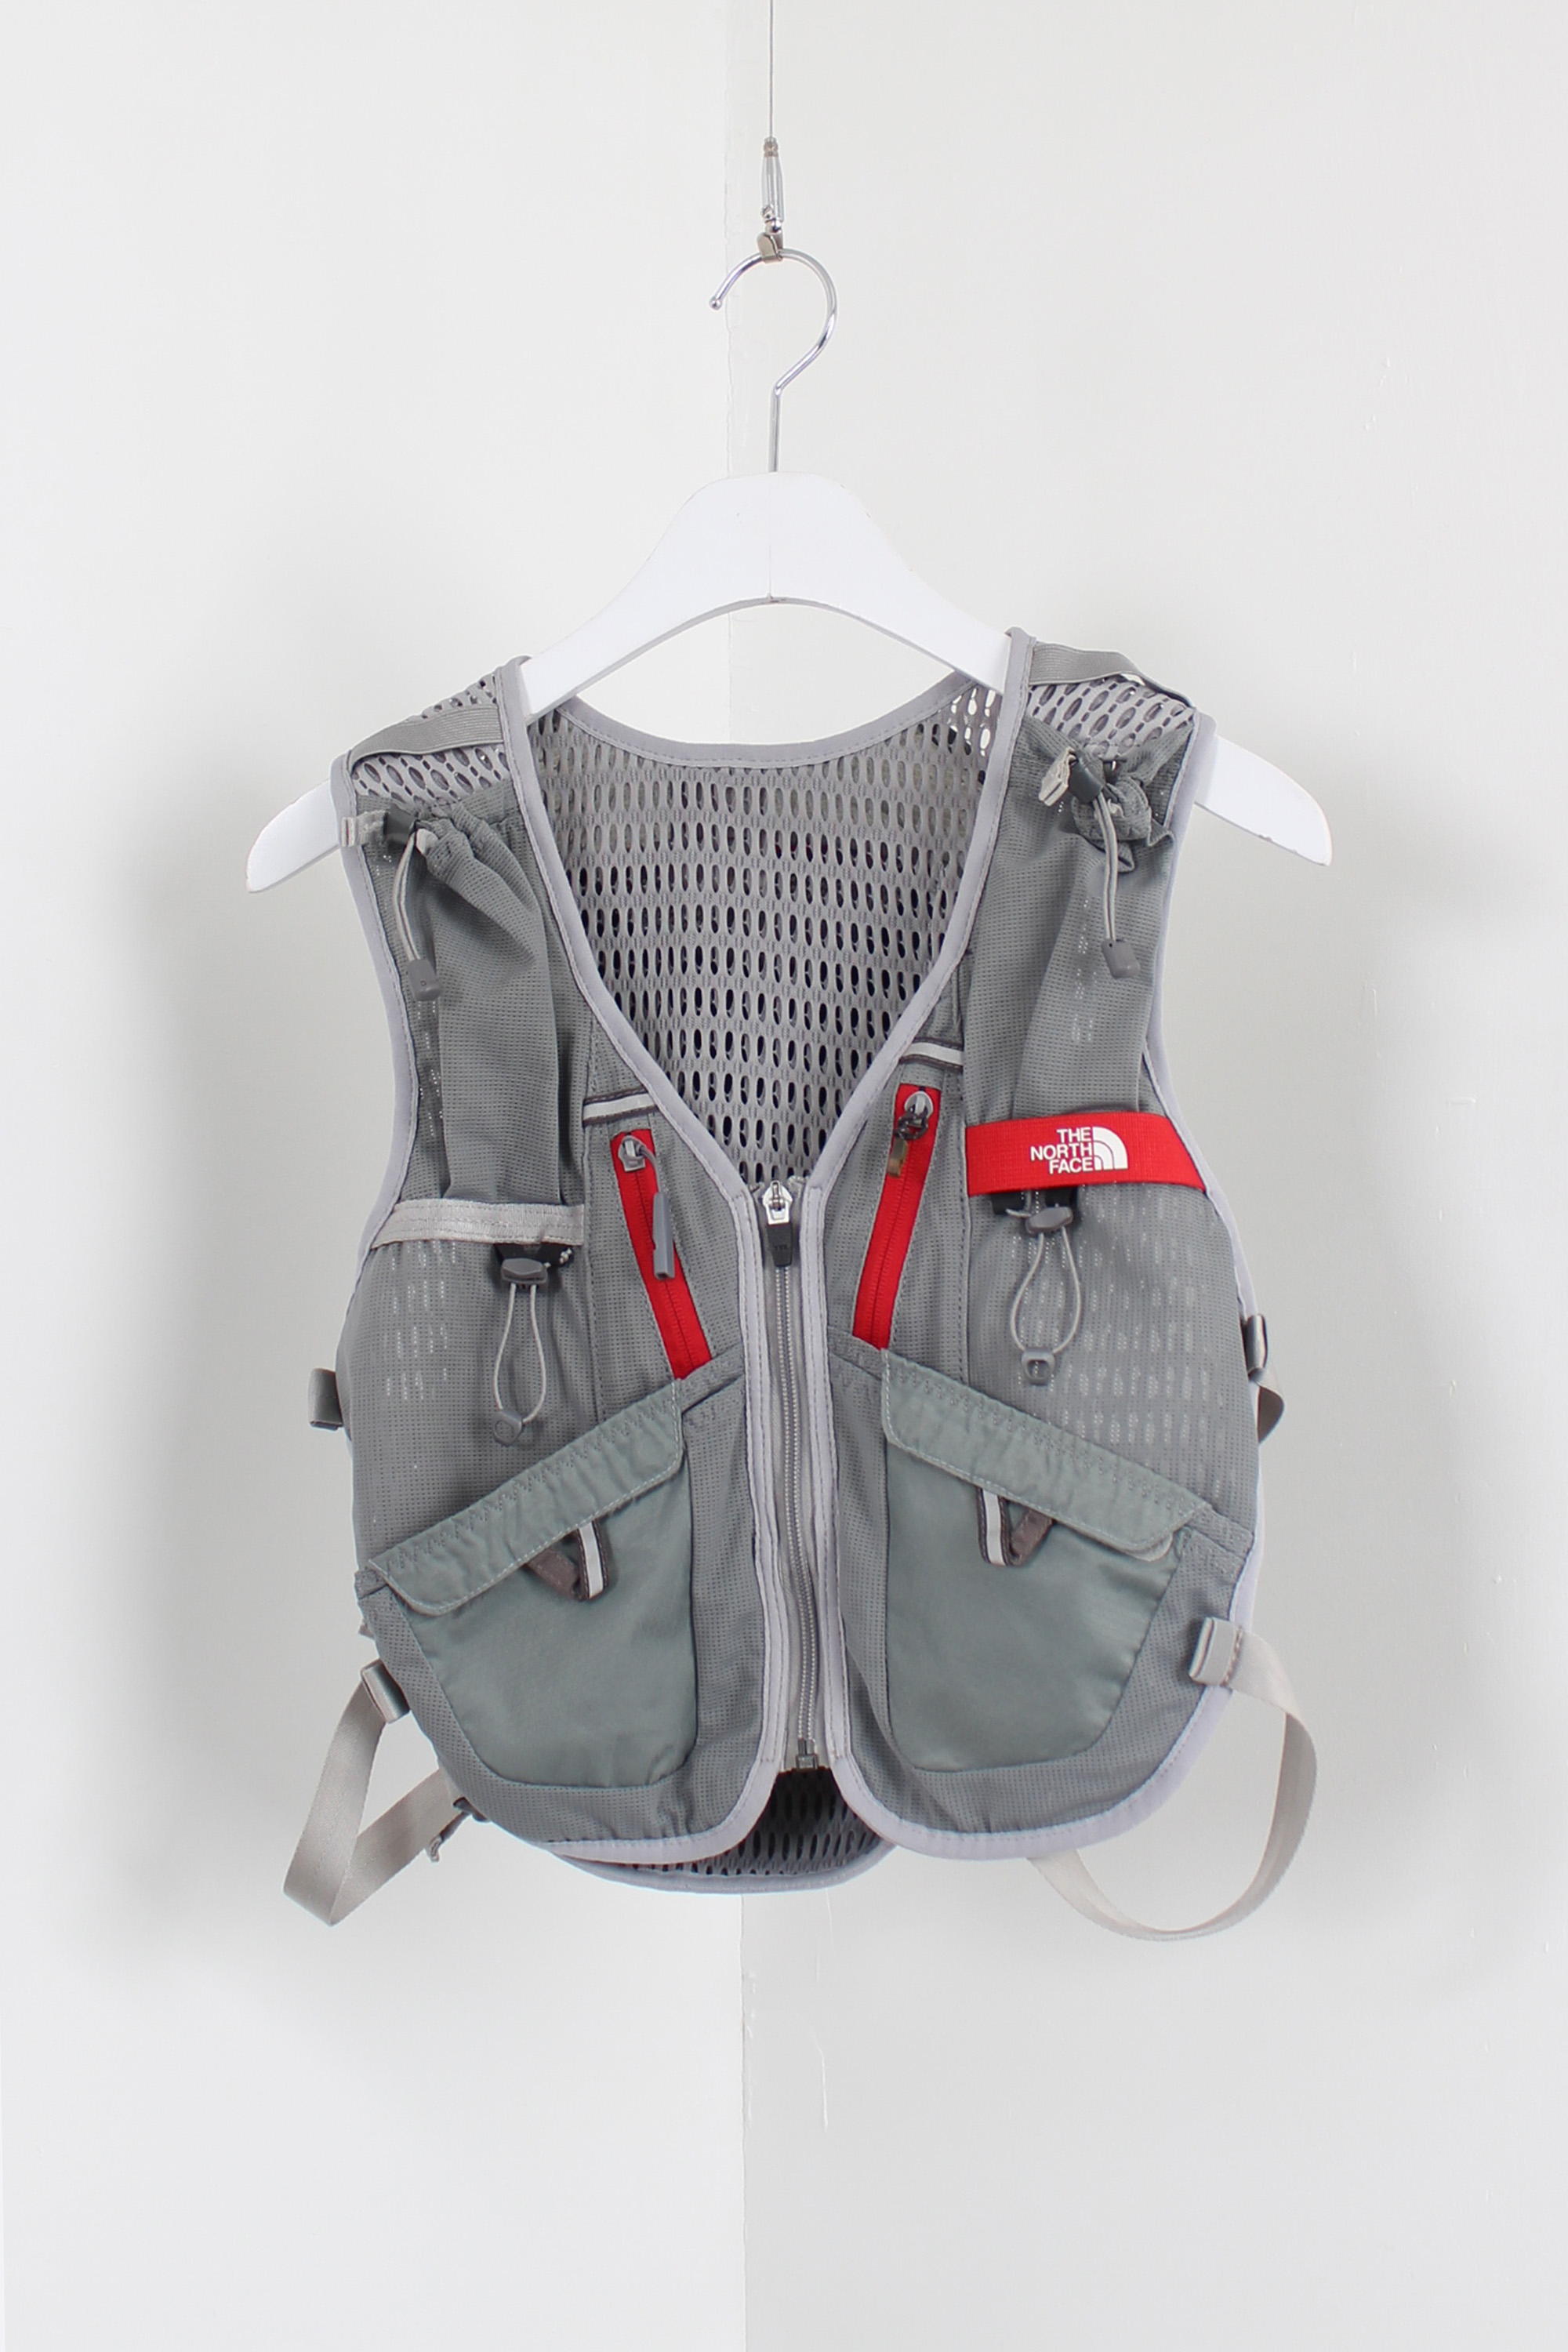 The north face trail vest